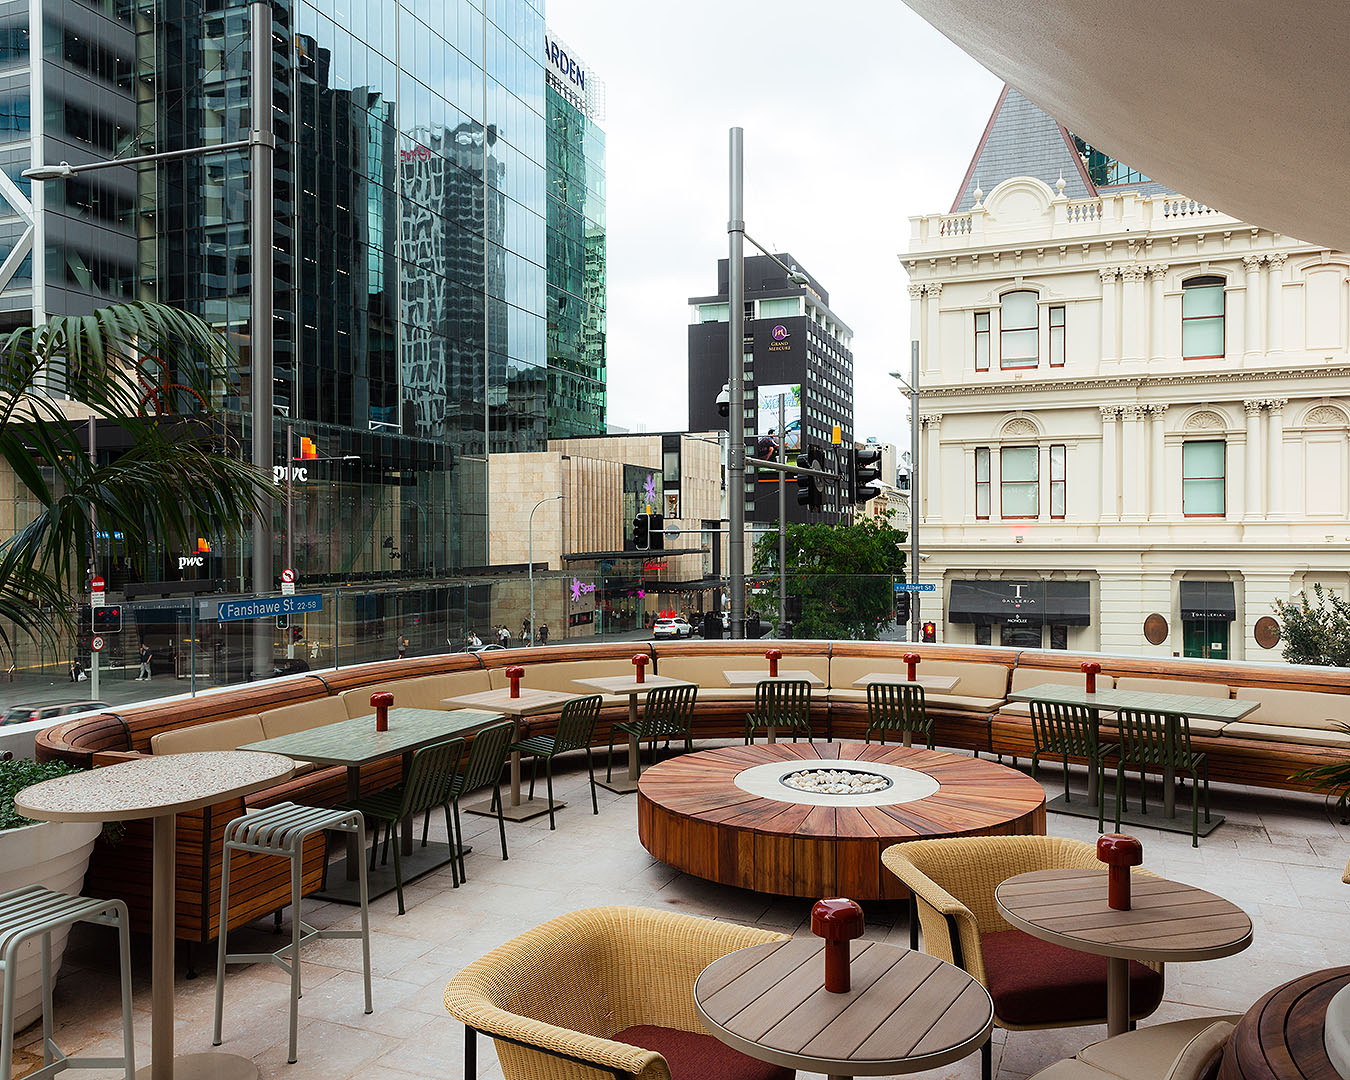 Palmer Rooftop bar shows a lovely outdoor space with chairs and tables.